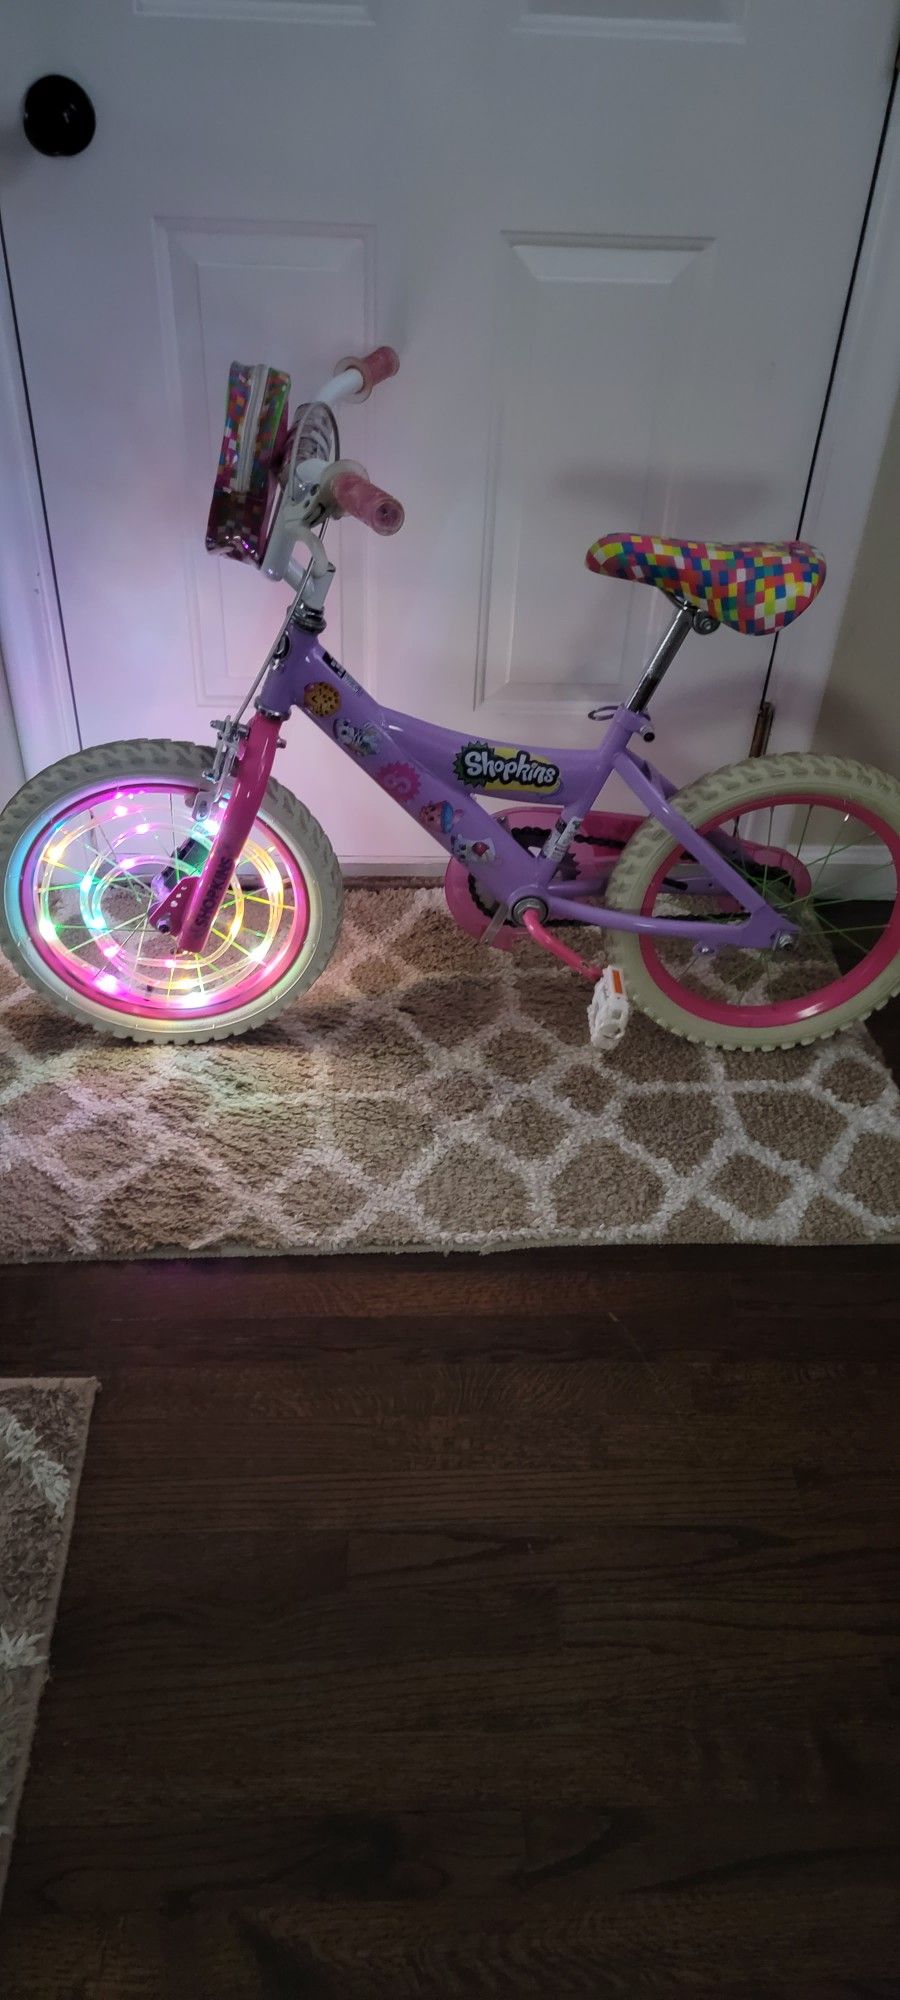 14" GIRLS Bike  Dynacraft, Shopkins, Pink, Purple, with NO Training Wheels Ages 3-10 WITH FRONT LIGHT UP TIRE ALMOST NEW CONDITION 